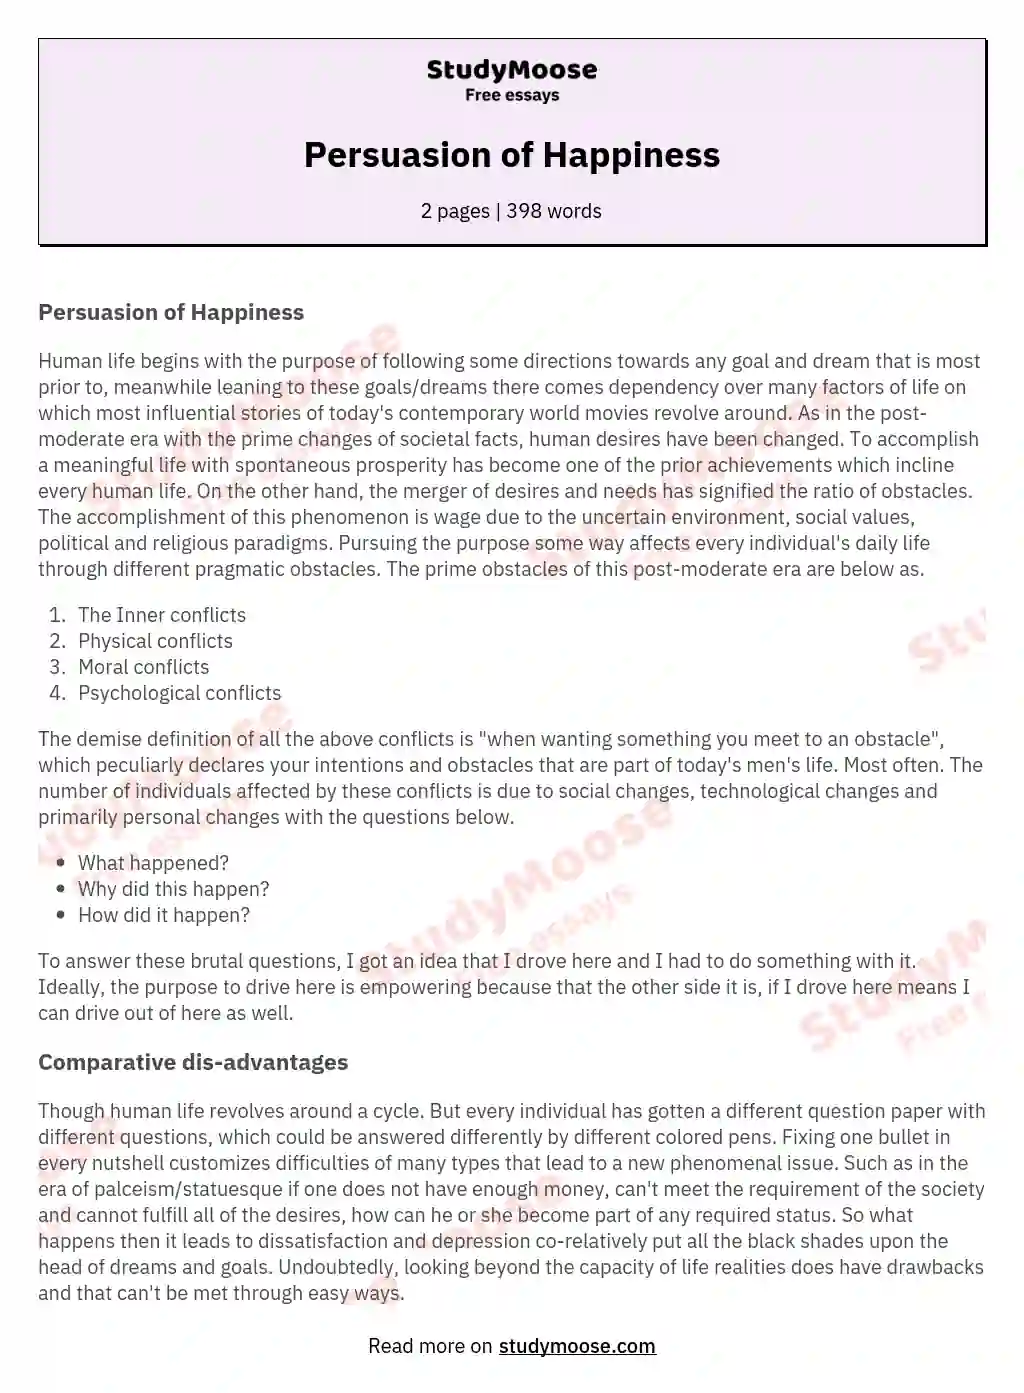 Persuasion of Happiness essay